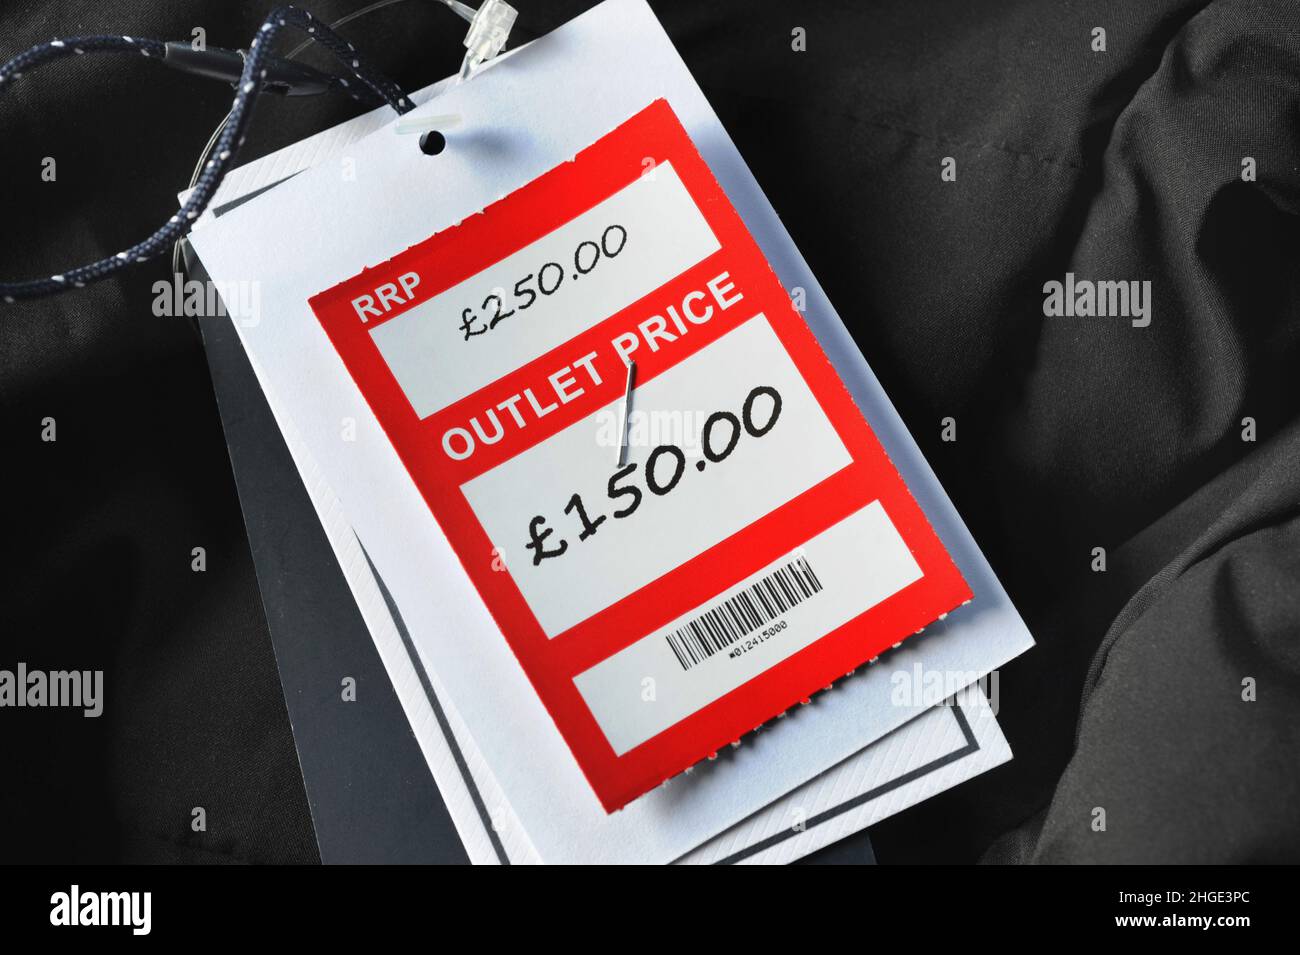 RETAIL CLOTHING OUTLET PRICE TAGS RE SALES DISCOUNT COST OF LIVING HIGH STREET SHOPS ETC UK Stock Photo